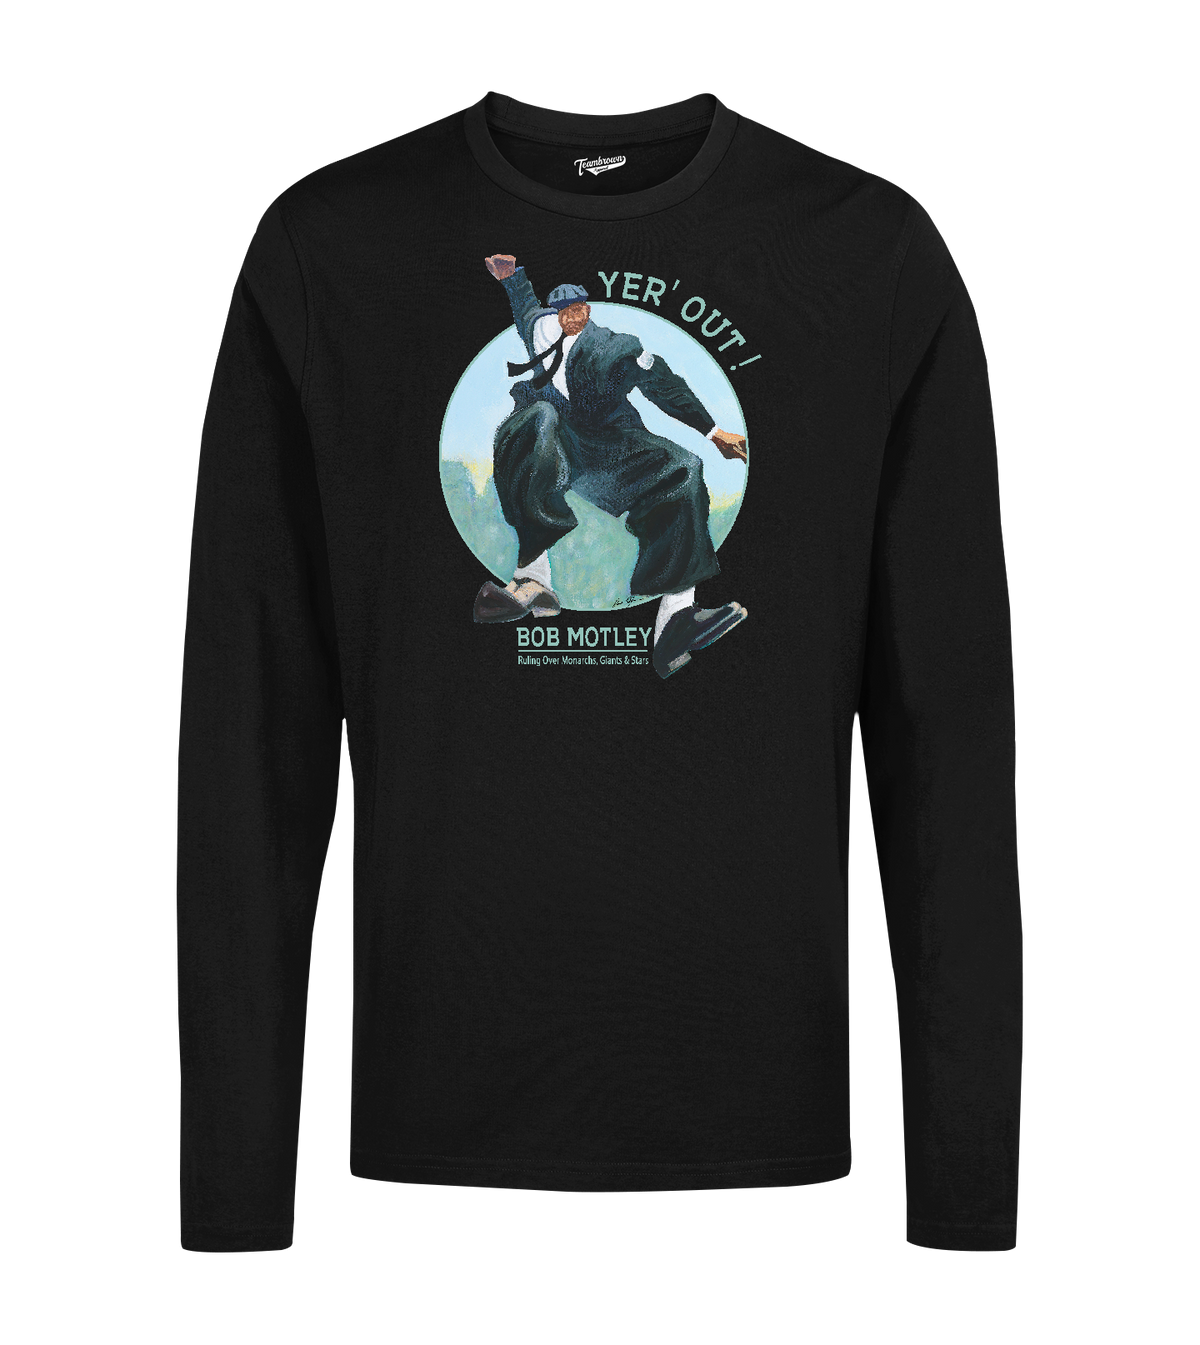 Bob Motley - Yer' Out! - Unisex Long Sleeve Shirt | Officially Licensed - YABBA BIRI PRODUCTIONS, INC.